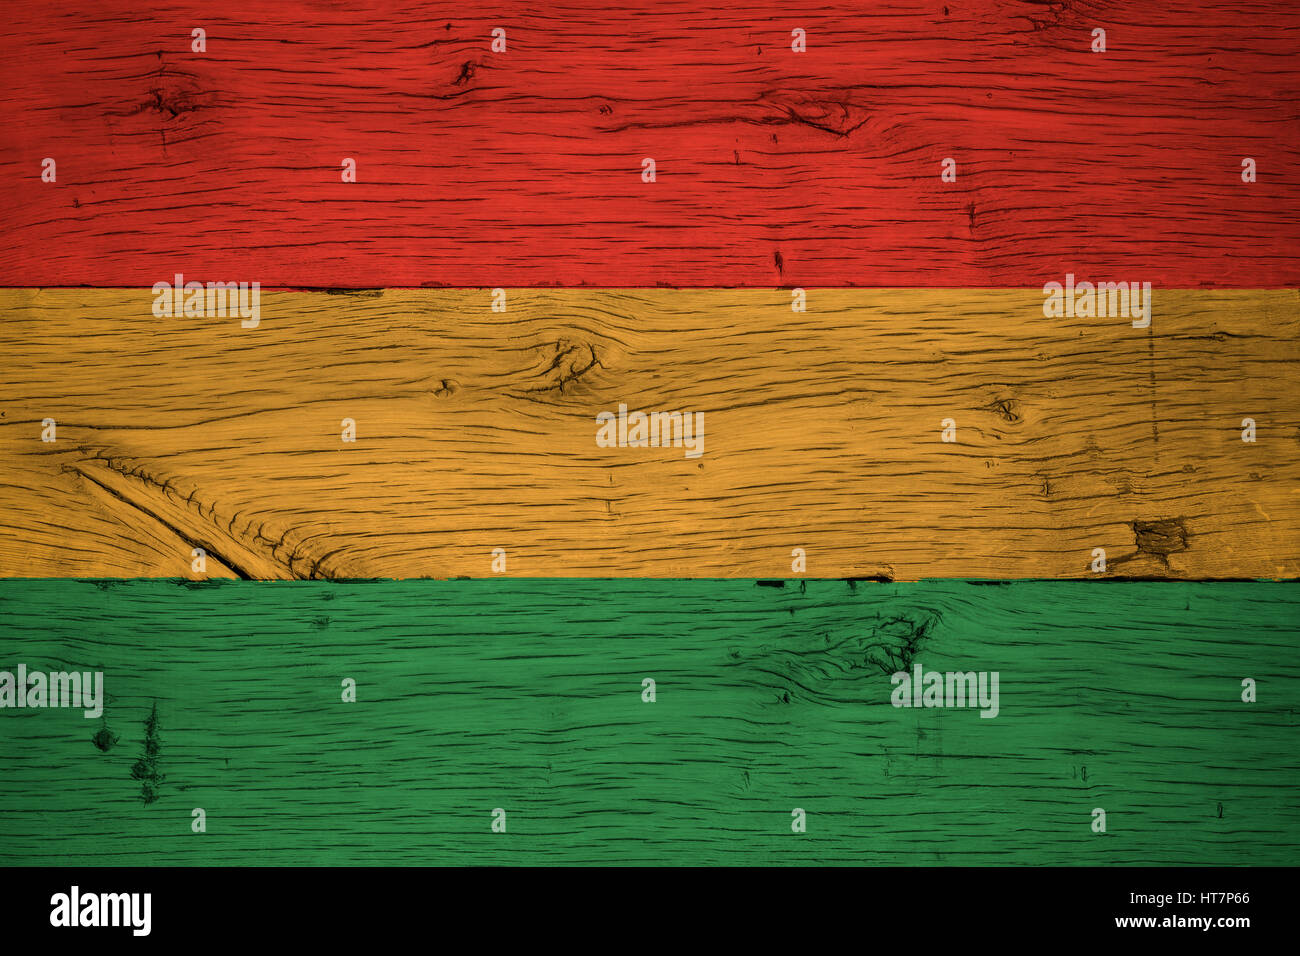 Bolivia civil flag painted on old oak wood. Painting is colorful on planks of old train carriage. Stock Photo